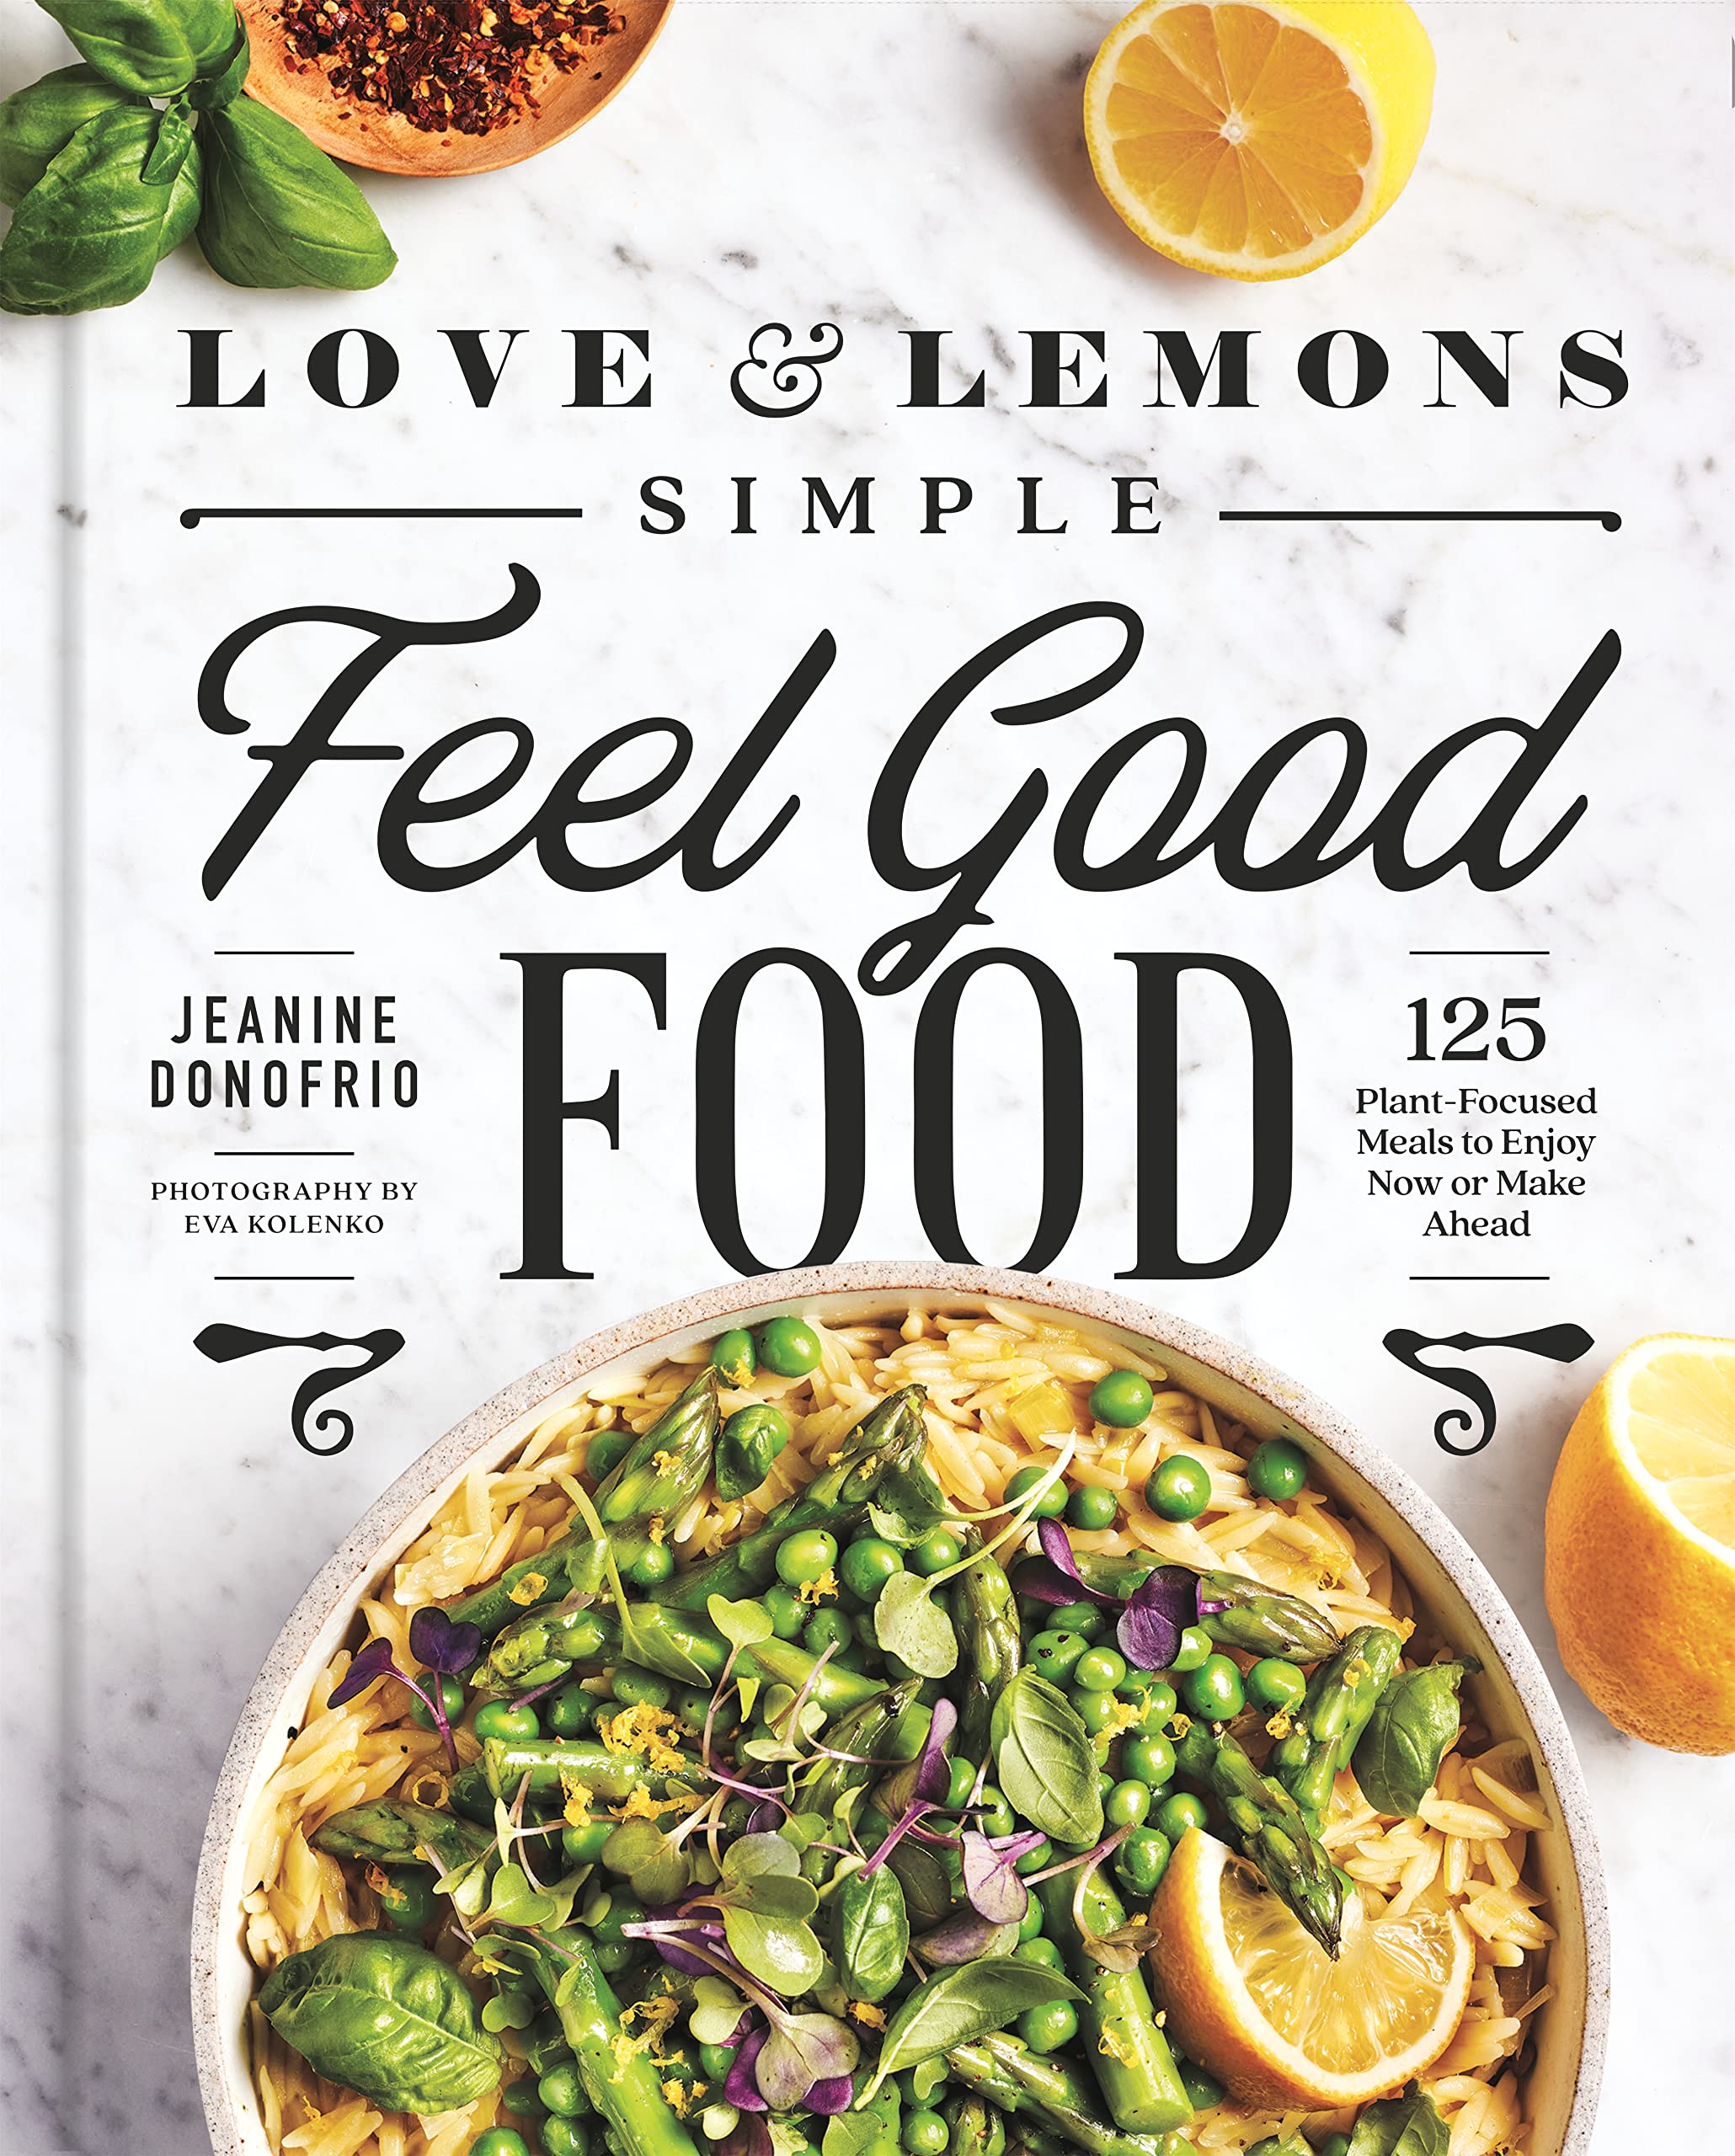 Love and Lemons Simple Feel Good Food: 125 Plant-Focused Meals to Enjoy Now or Make Ahead (Jeanine Donofrio)